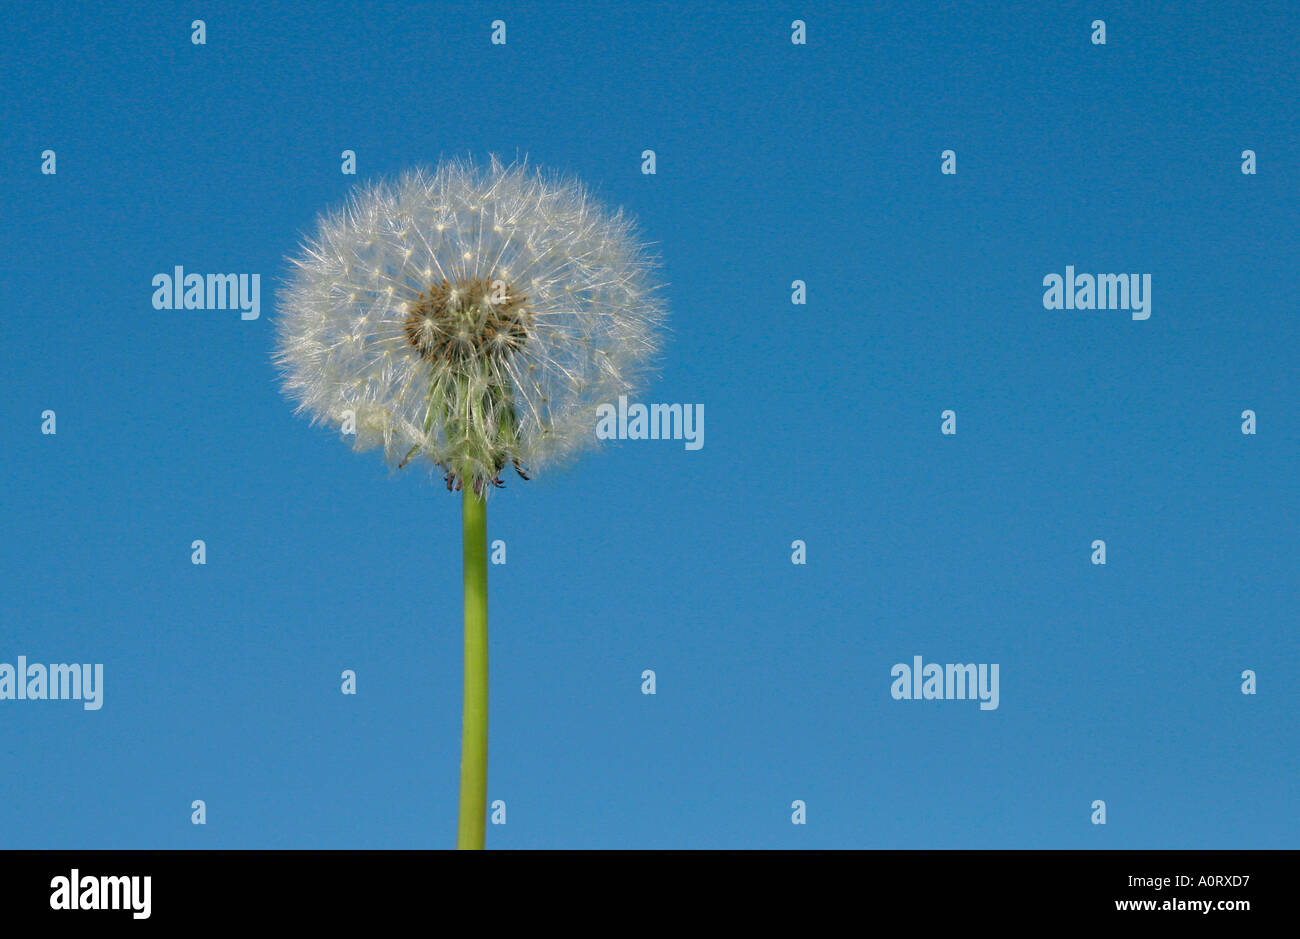 Close up of Dandelion stalk and seedhead with seeds still present and blue sky in background One of two images in a series Stock Photo